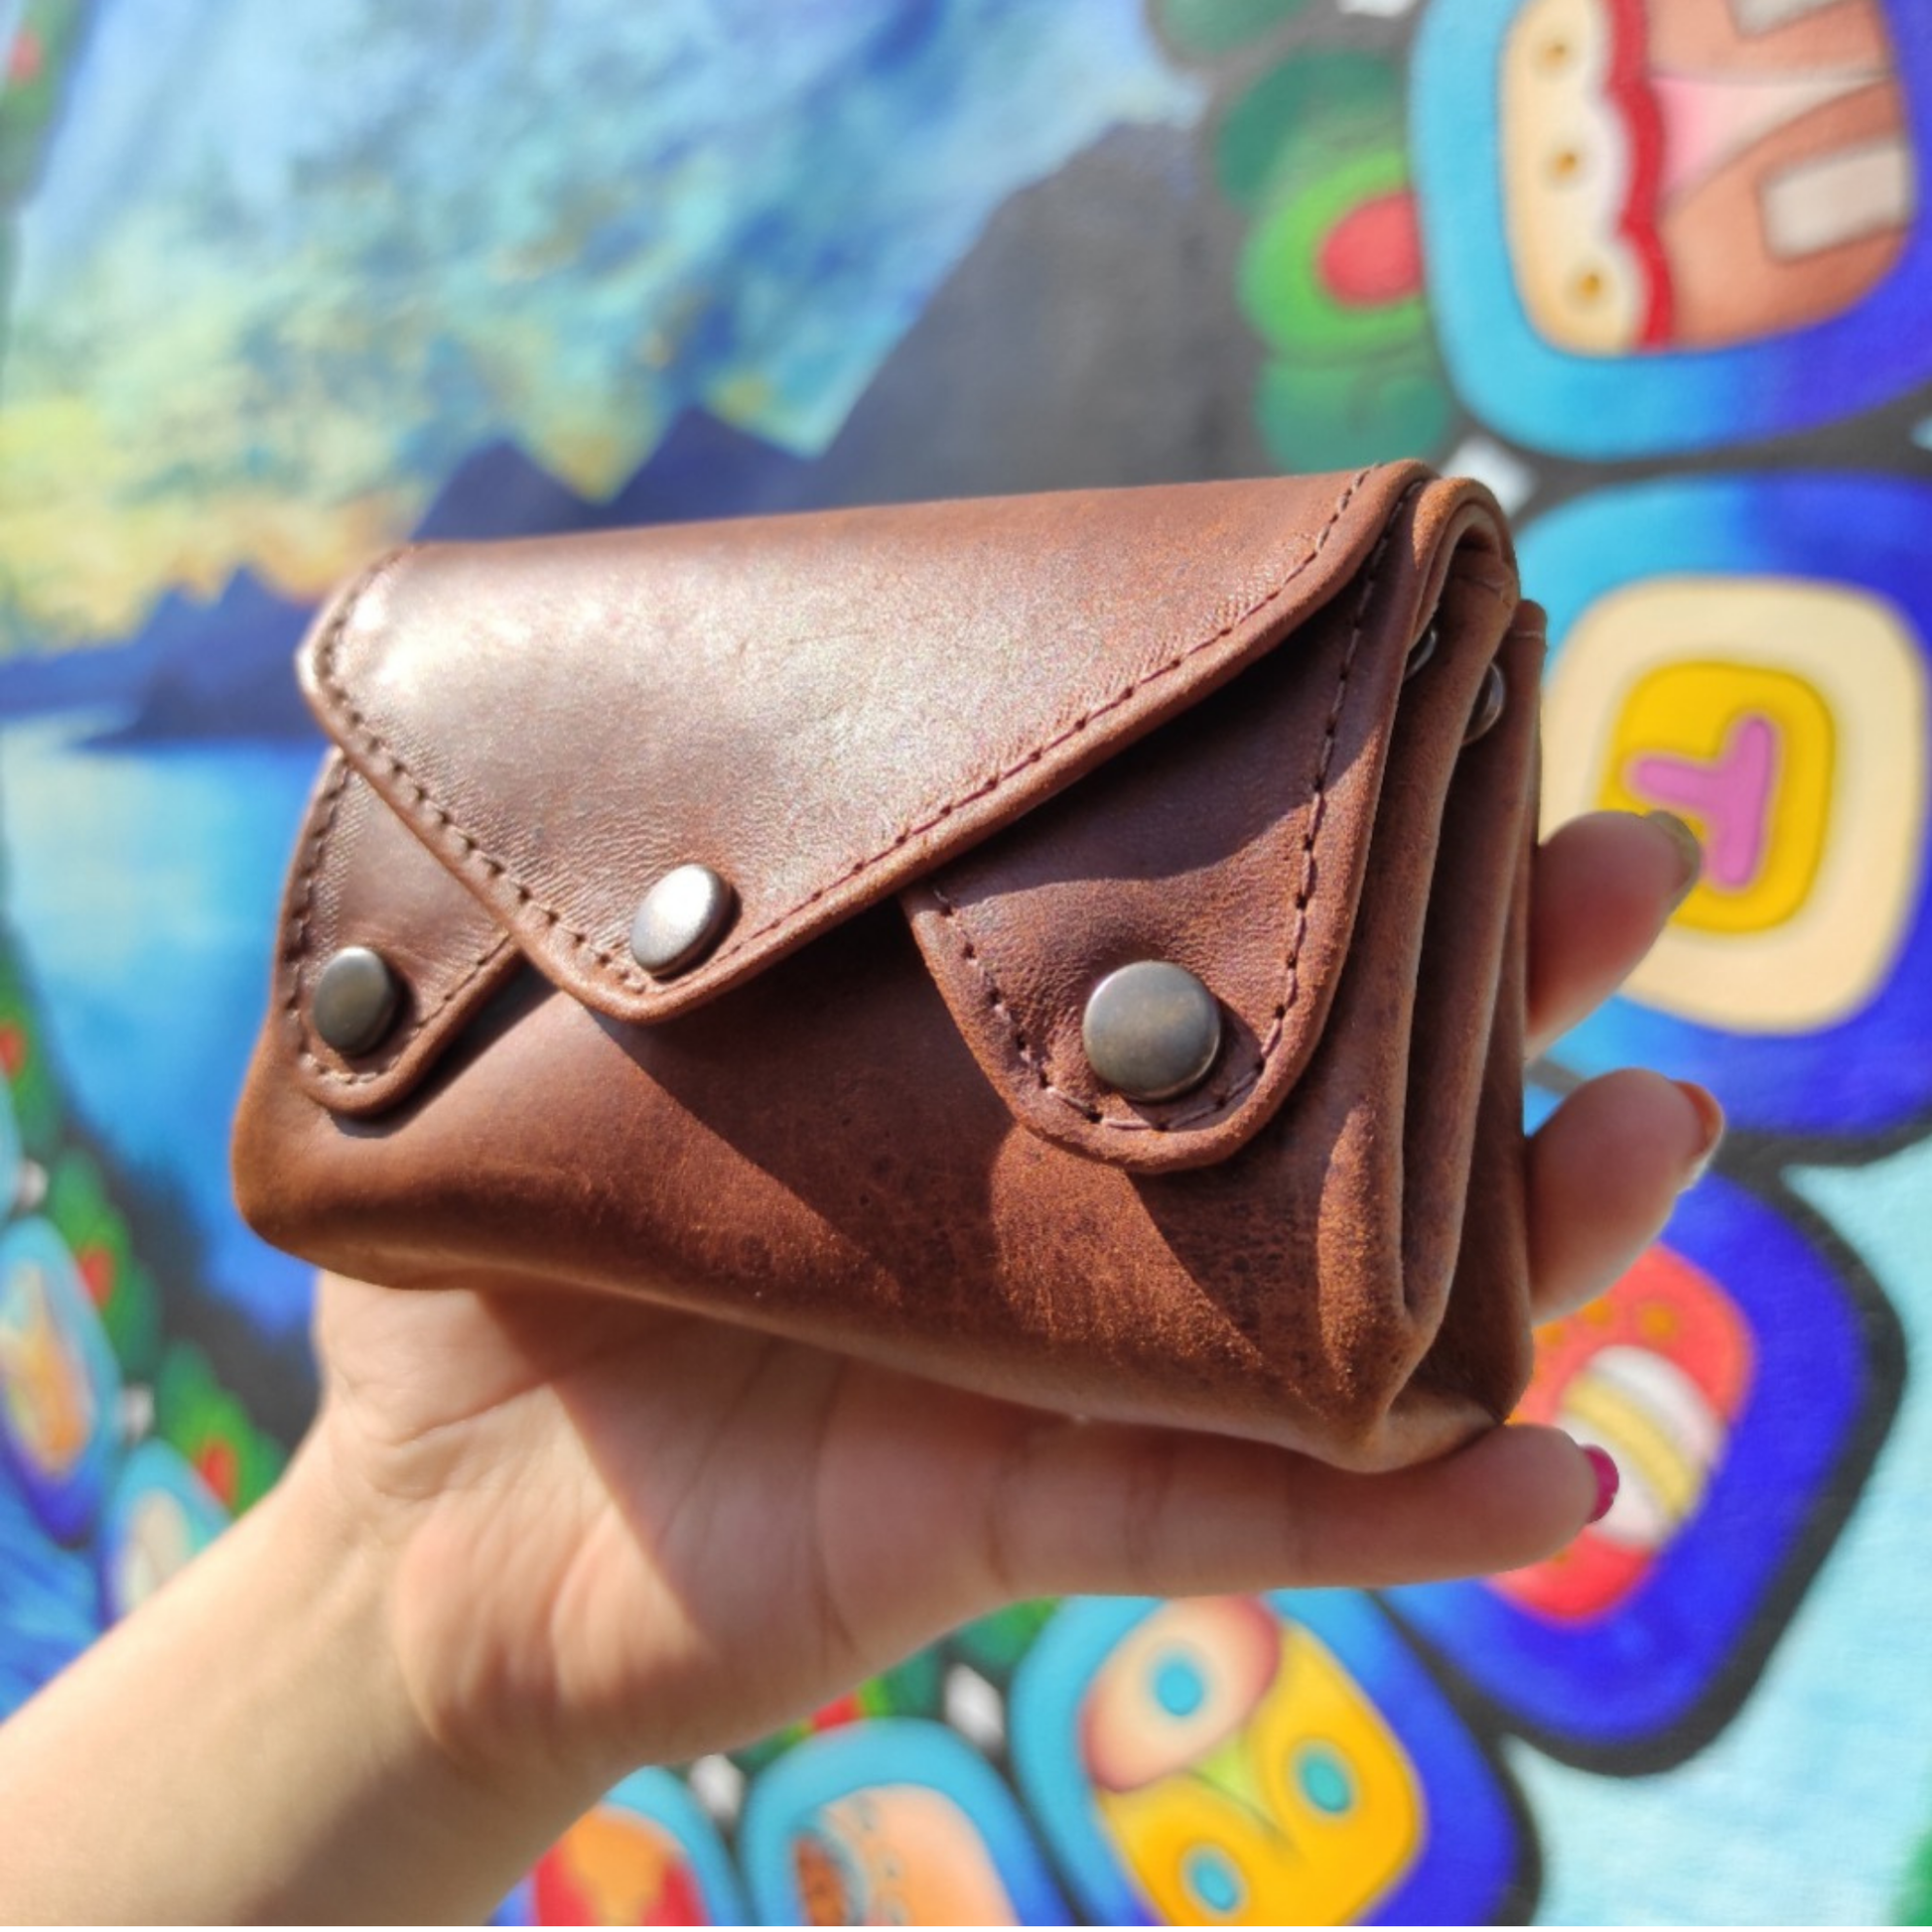 The Smoll Leather Wallet